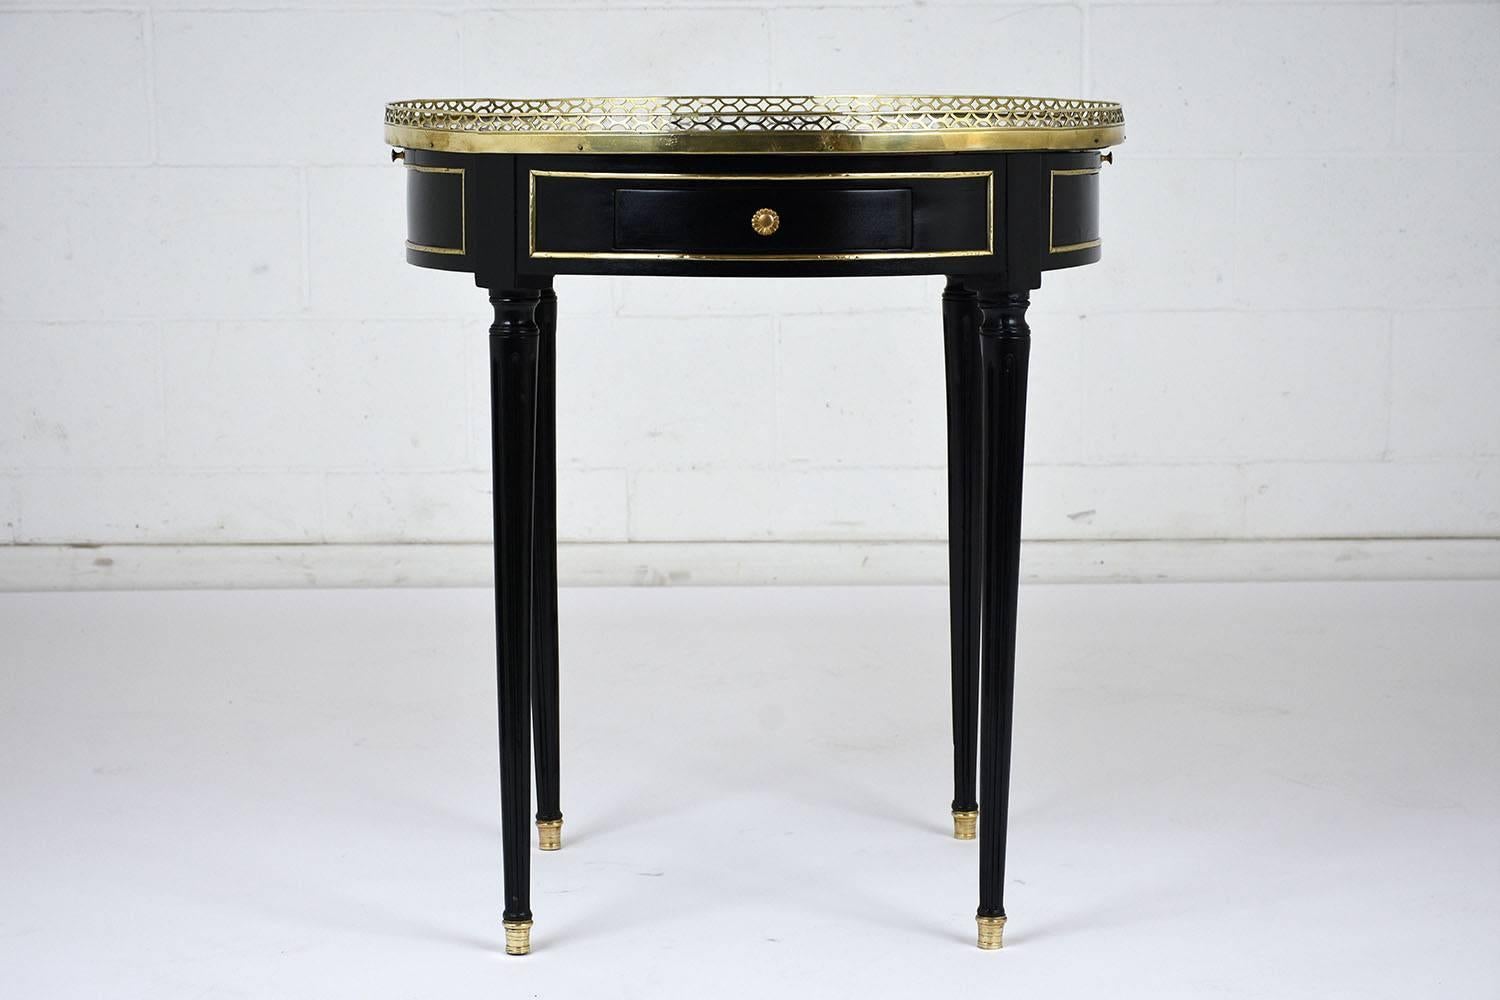 This 1900s Louis XVI-style end table features an ebonized mahogany body with a lacquered finish and brass moulding details. There are two drawers on opposite side of the table with a decorative brass knob. Also there are two shelves with embossed